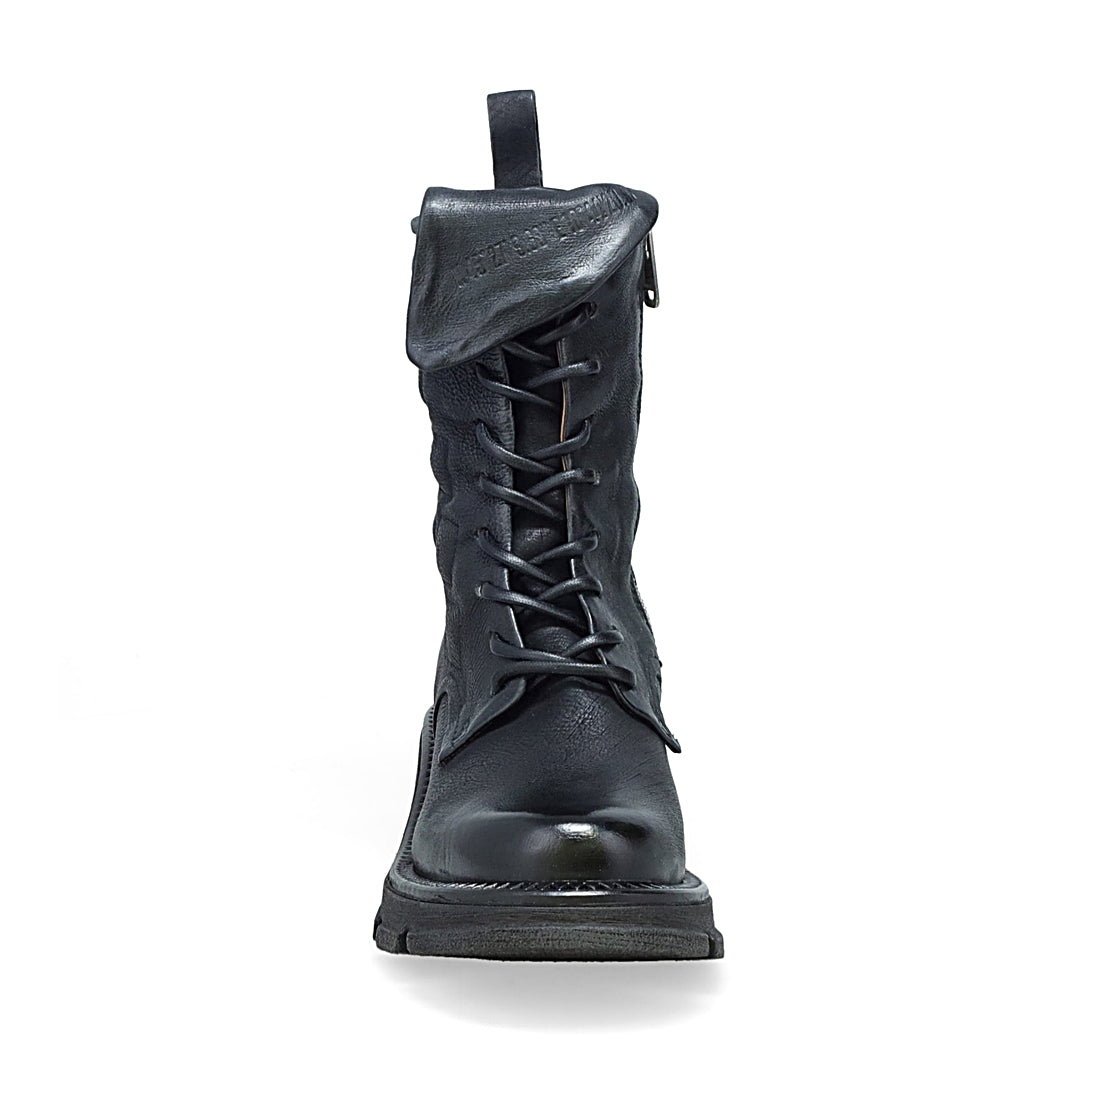 Front view of the AS98 Lockwood Lace Up Combat Boot. This black boot features geometric squares stitched into the side and back of the upper.